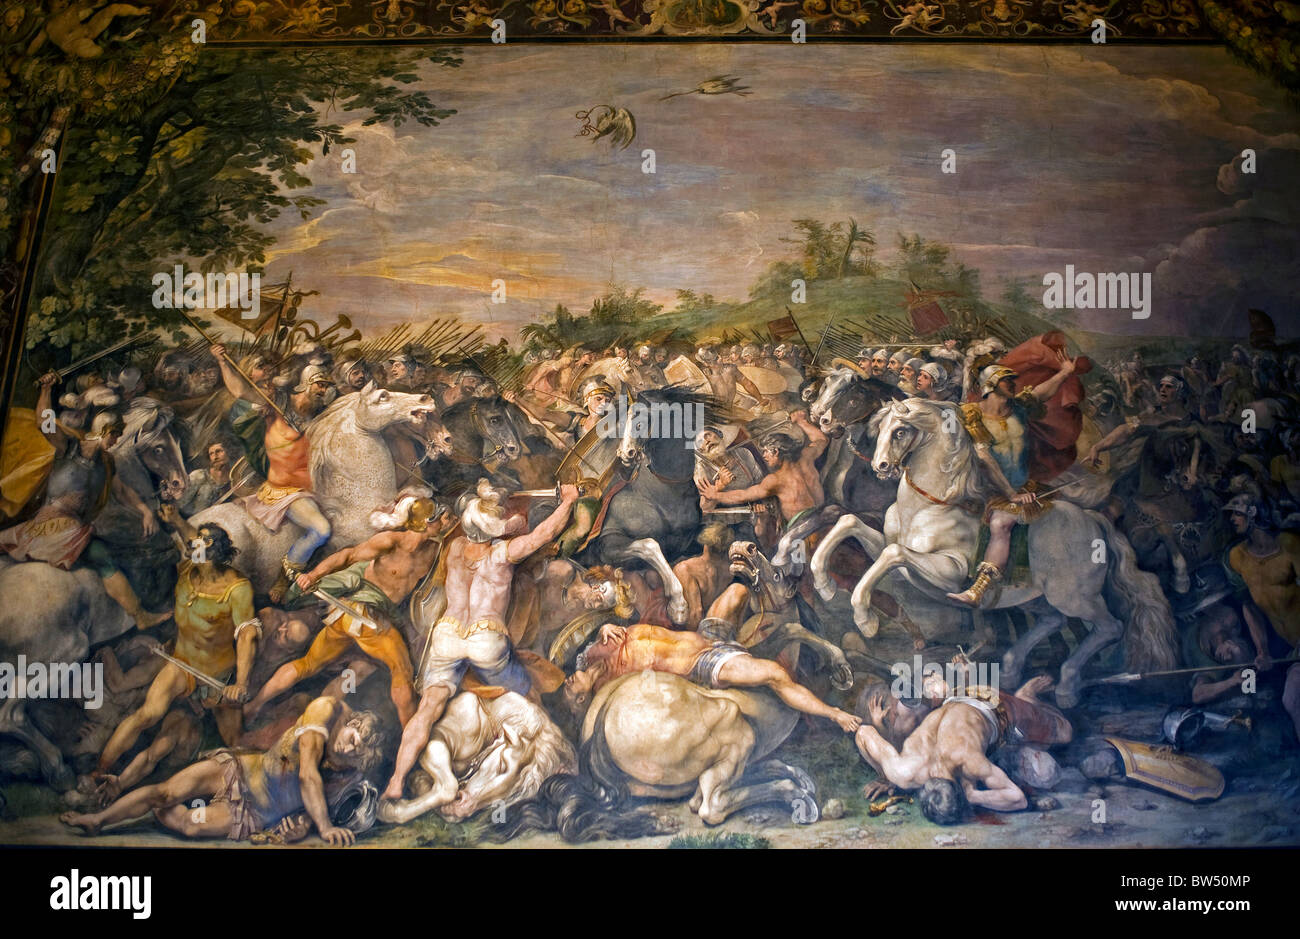 'Battle of Tullus Hostilius against the Veientes and the Fidenates' fresco by Cavalier d'Arpino, Capitoline Museums, Rome, Italy Stock Photo